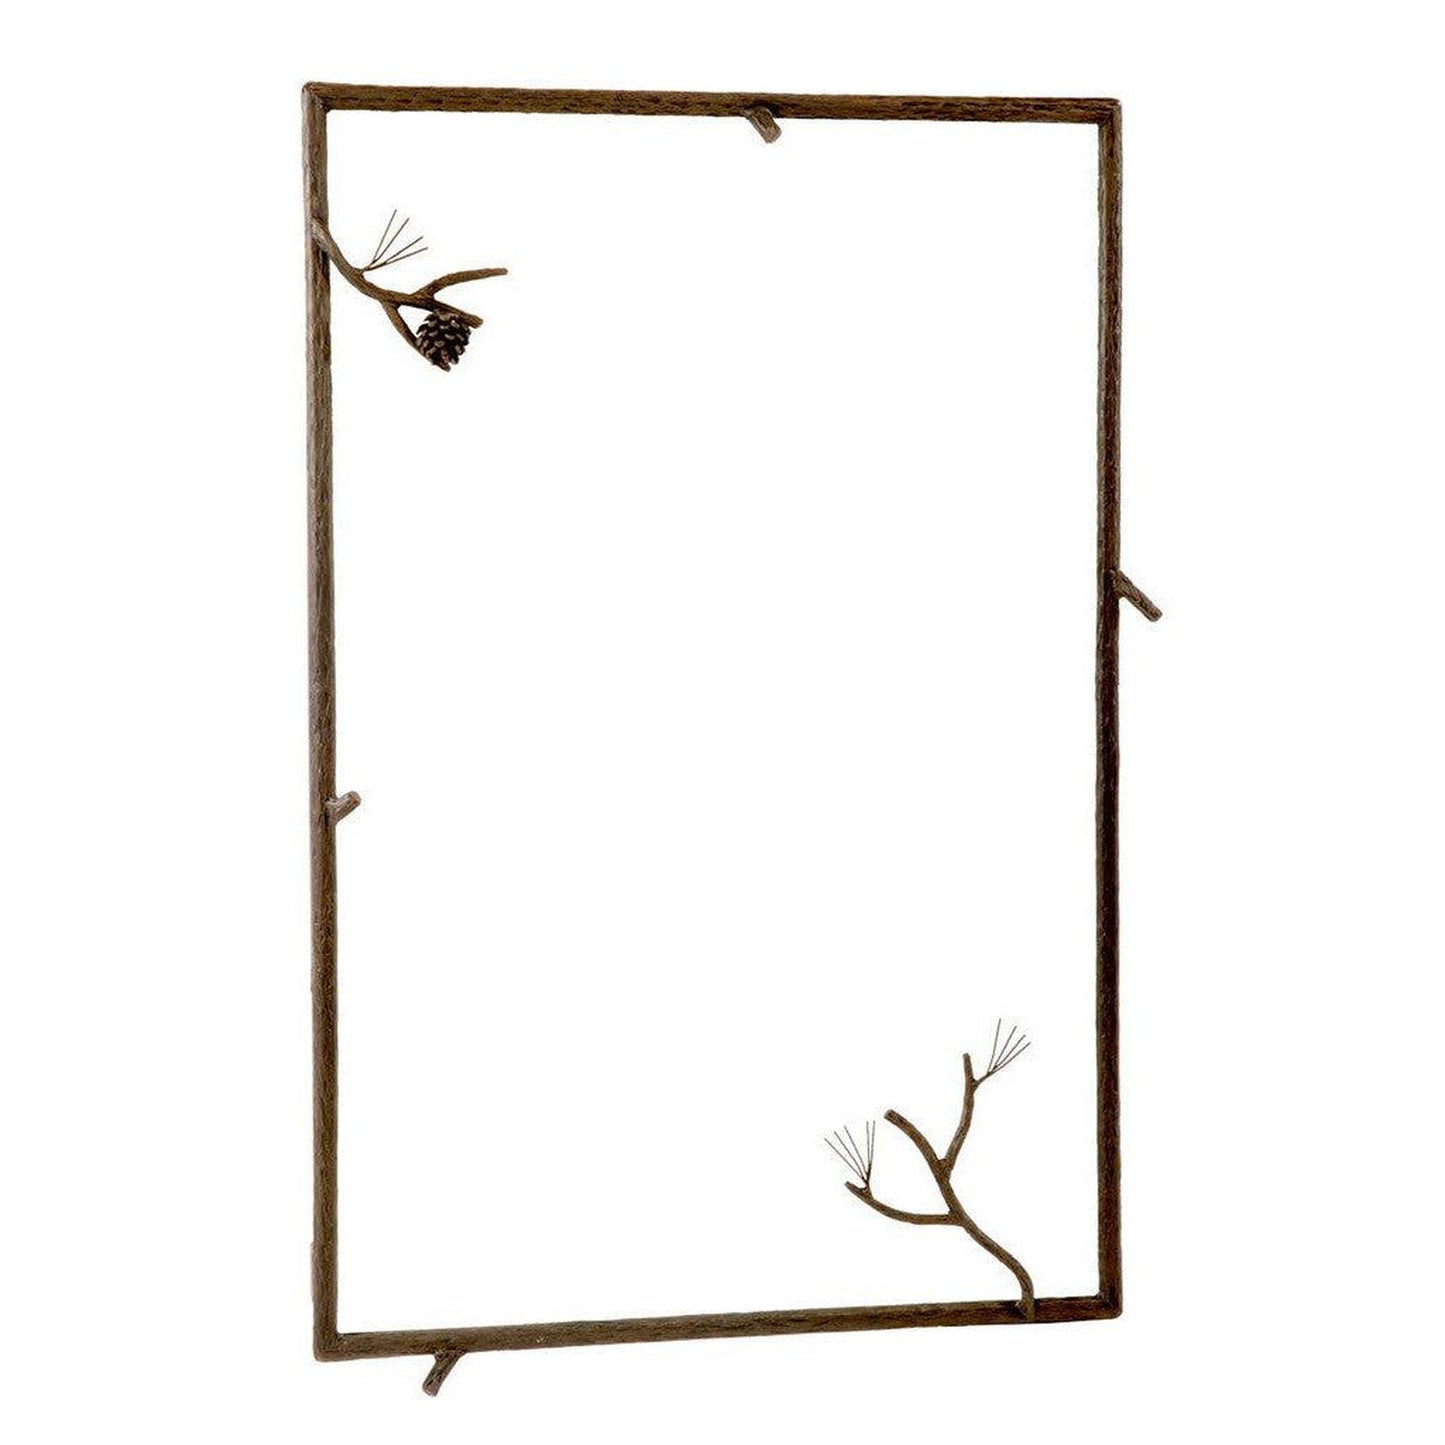 Stone County Ironworks Pine 25" x 21" Small Natural Bark Iron Wall Mirror With Copper Iron Accent